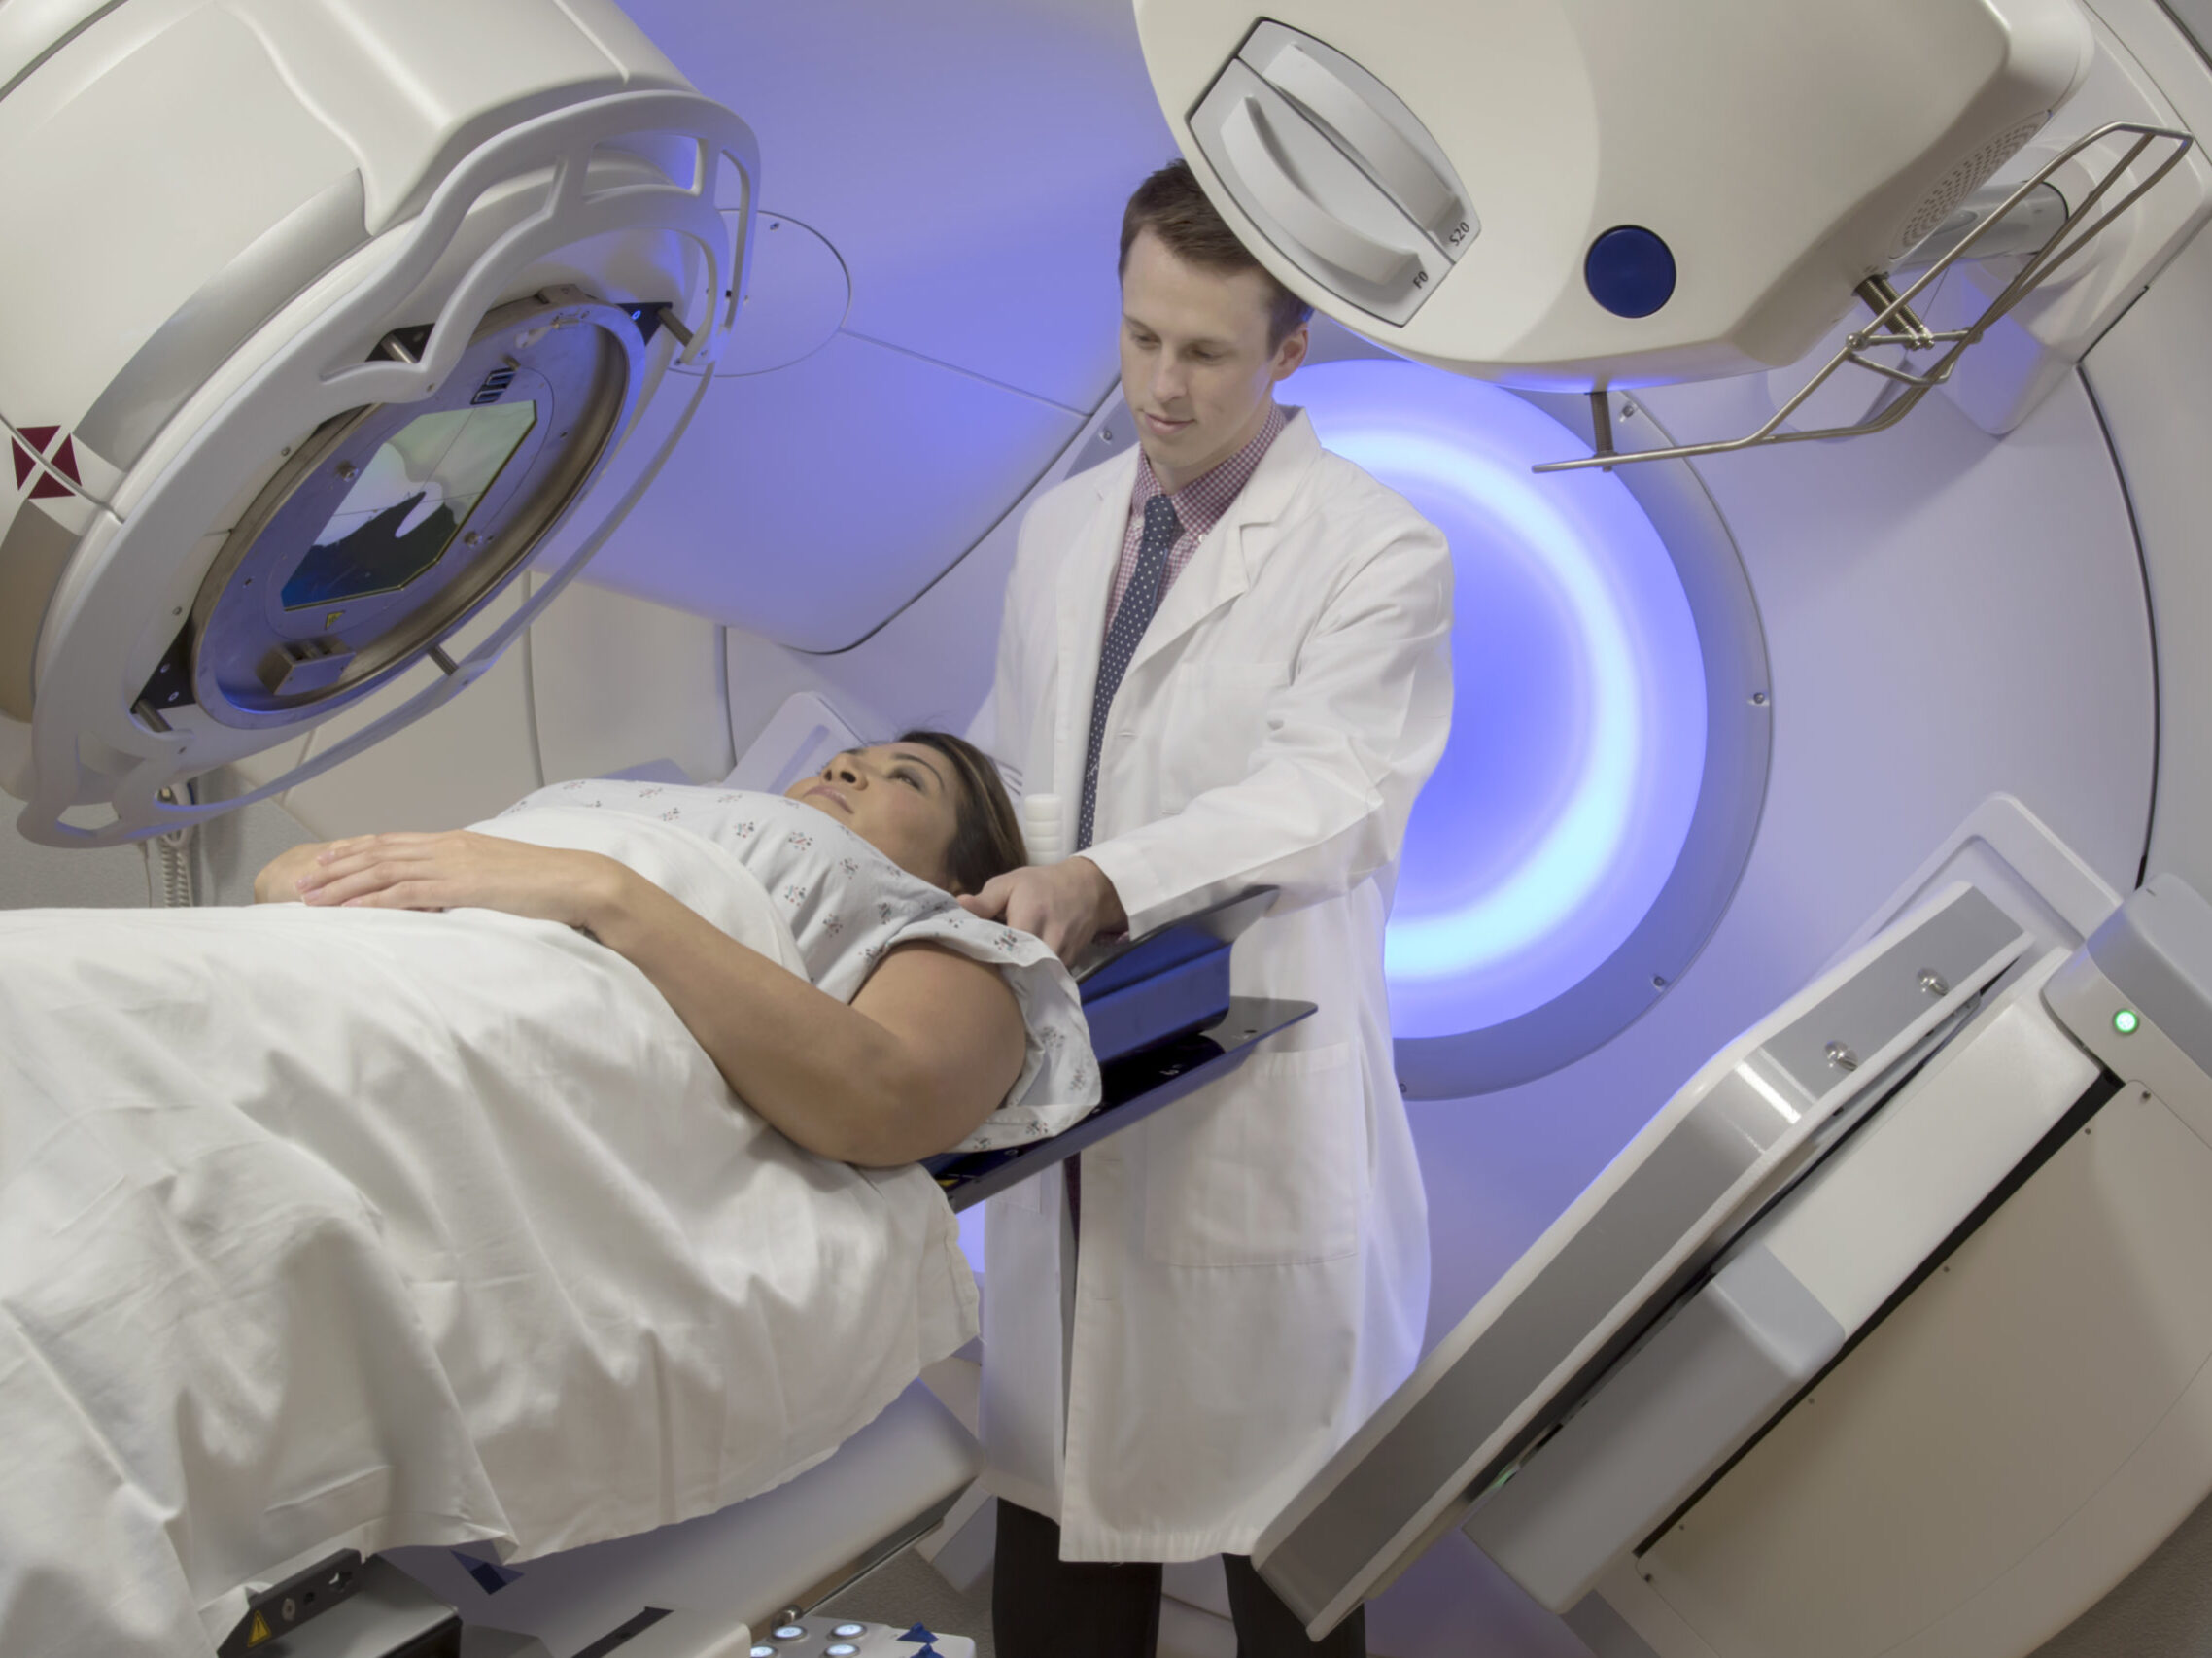 Cancer Treatments 101: What is Radiation Therapy? - Pretty in Pink